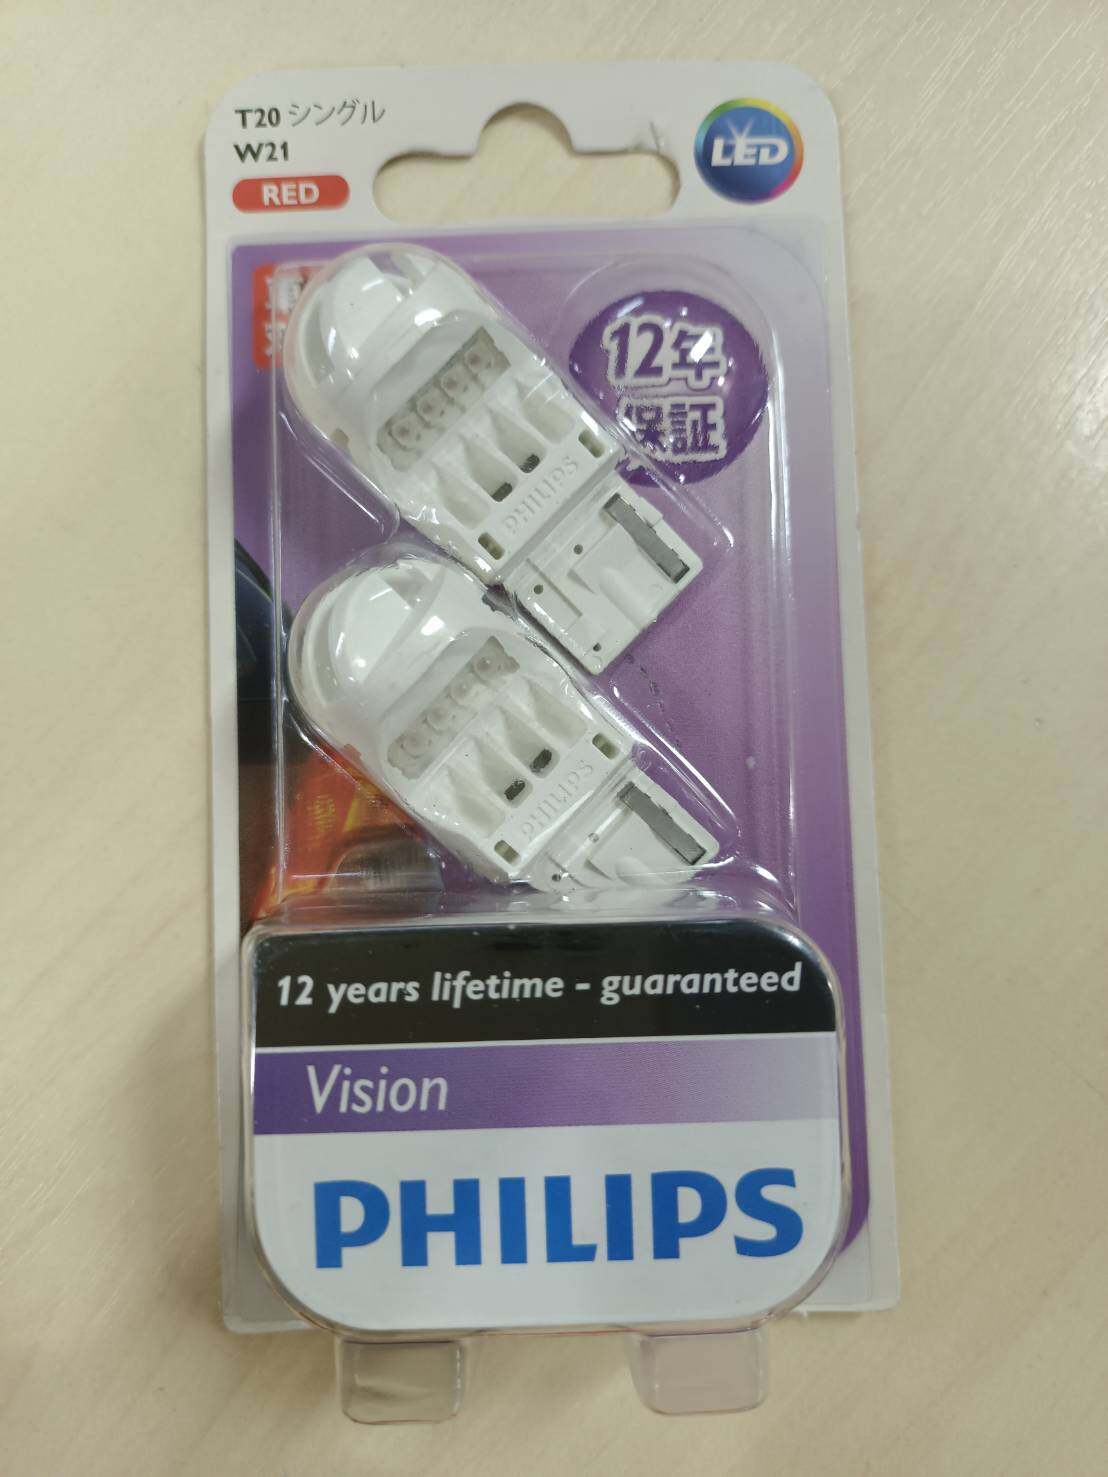 Philips Ultinon Pro6000 LED W21/5W 7443 T20 Two Contacts Red White